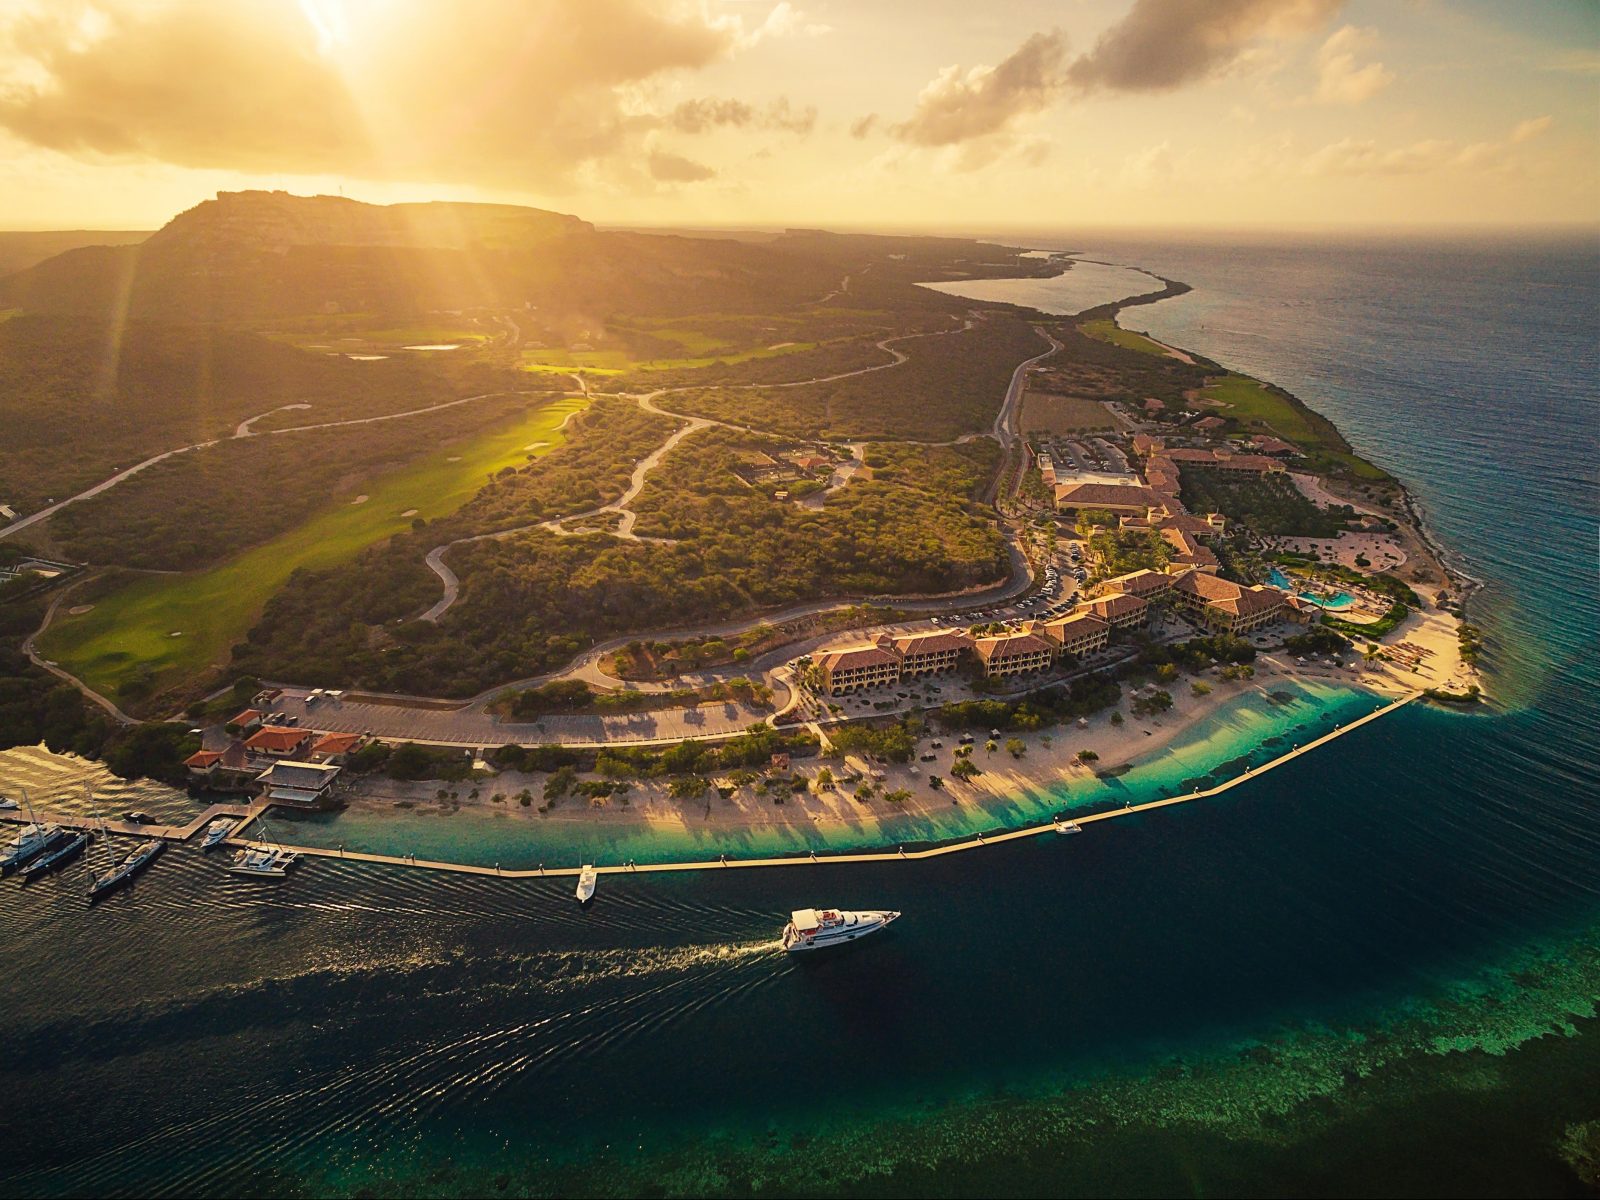 Sandals Resorts Announces Expansion to Curacao